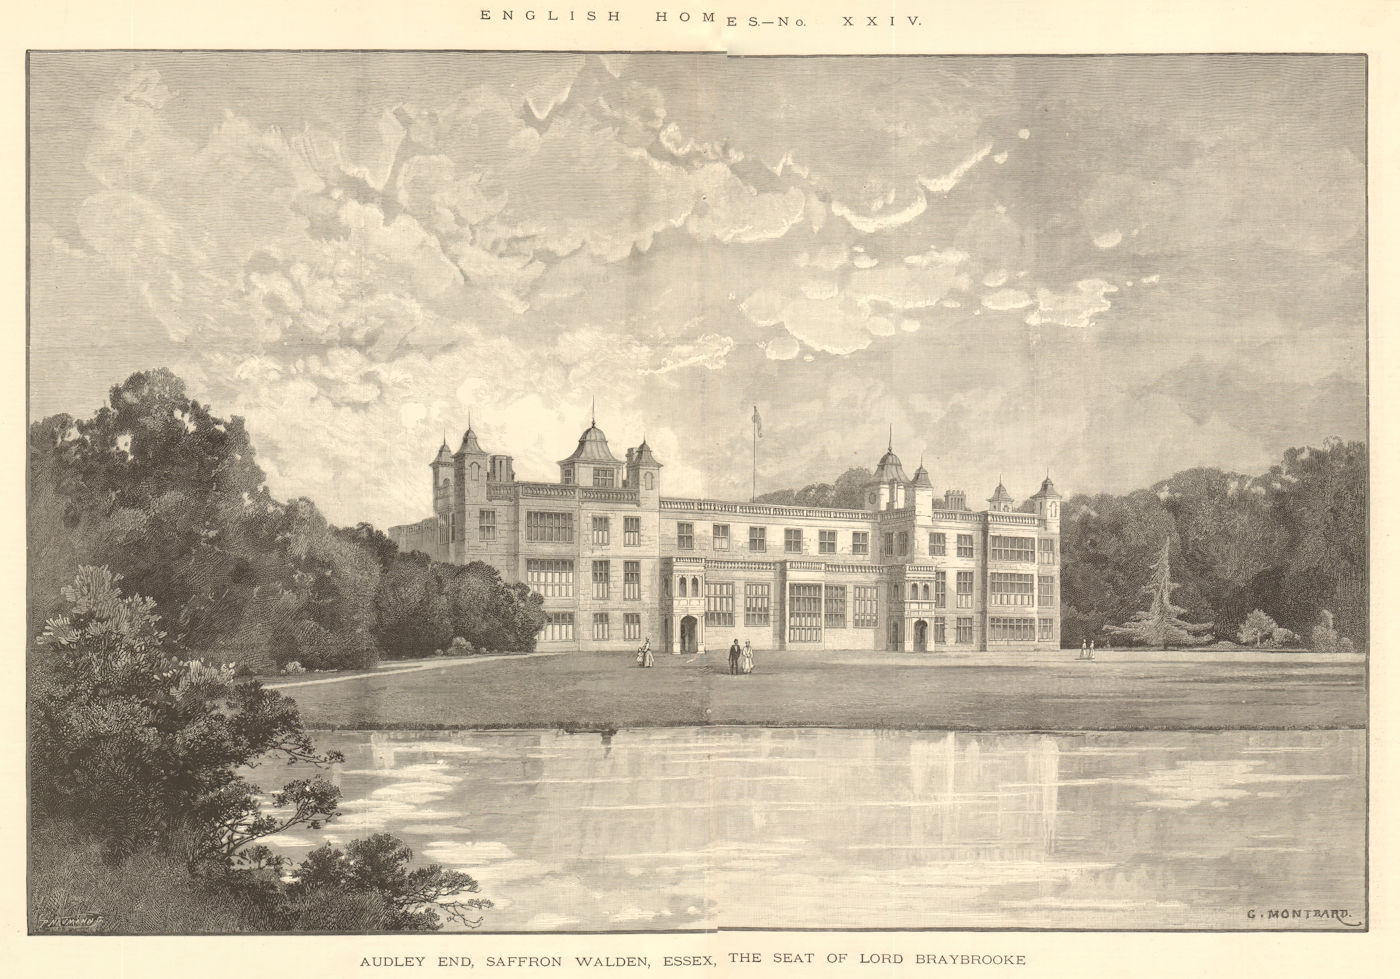 Associate Product Audley End, Saffron Walden, Essex, the seat of Lord Braybrooke 1890 ILN print